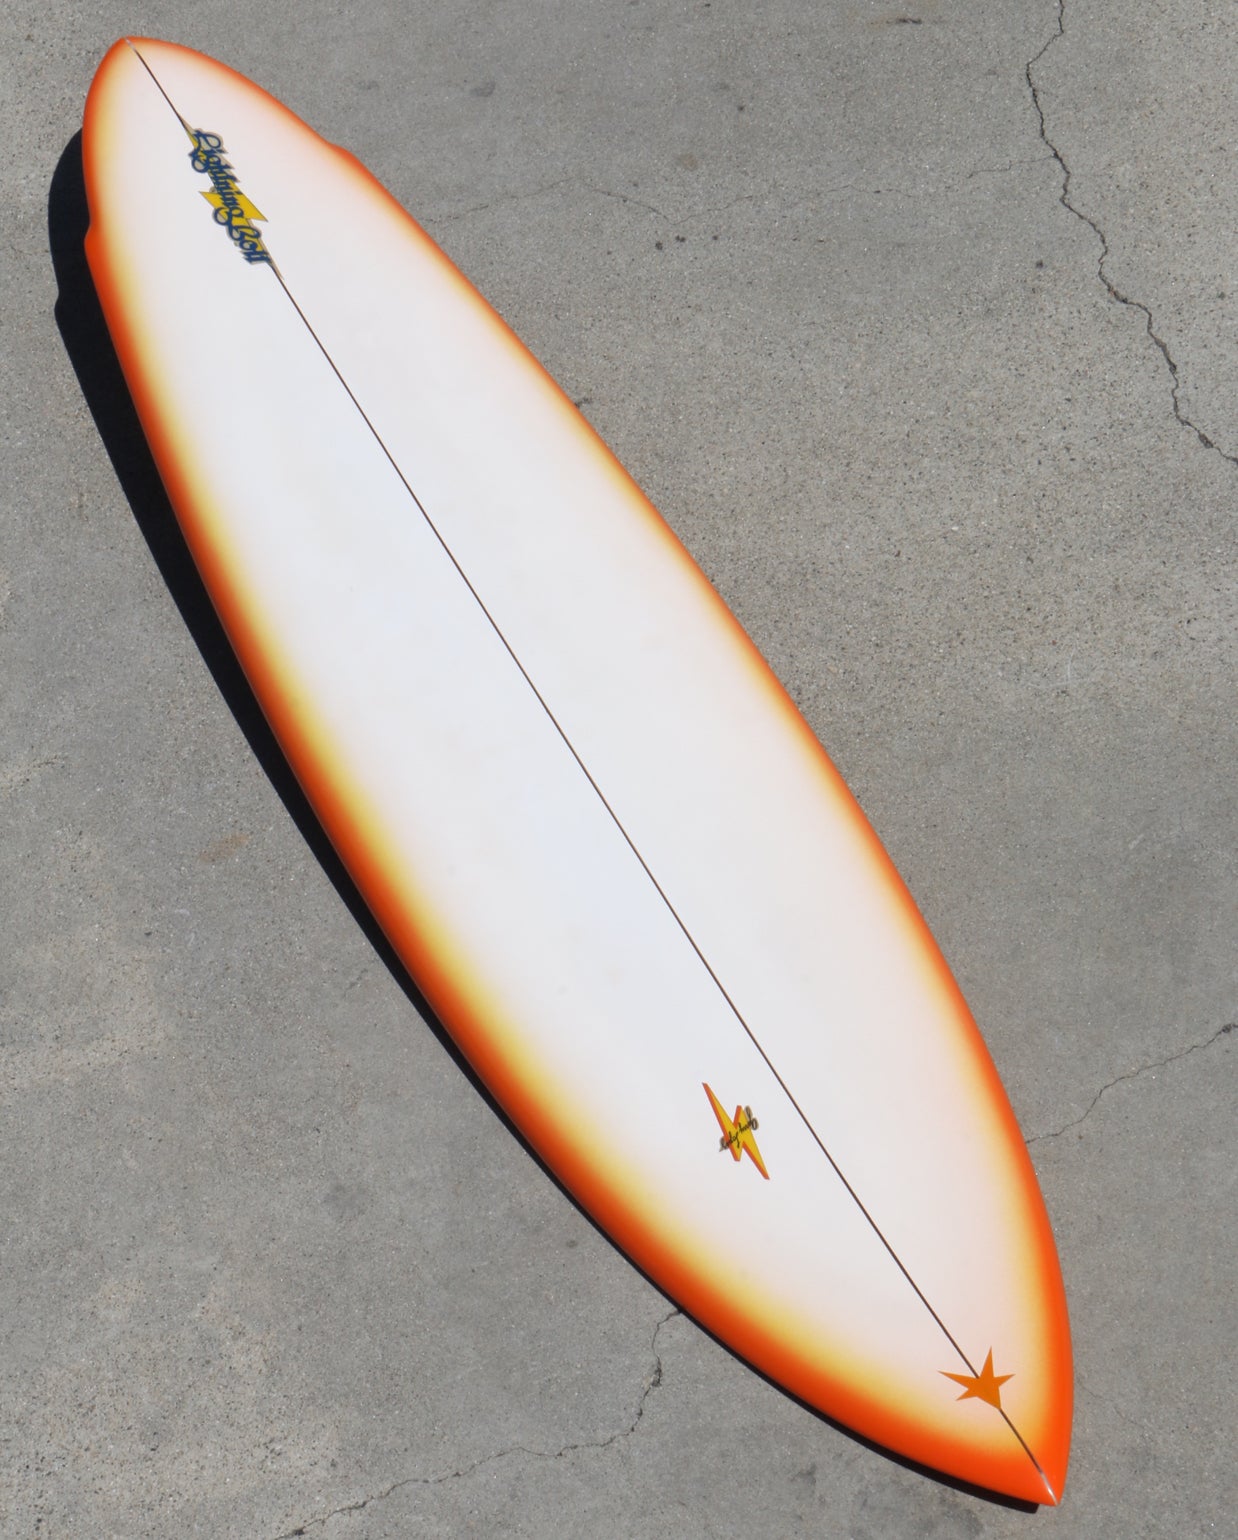 This is a rare 1976 Lightning Bolt Surfboard made by legendary shaper Terry Martin. Fully restored and measuring in at 6’9” this beautifully rounded swallow pintail board is a real eye-catcher. The bottom is as is exciting as the deck with color and